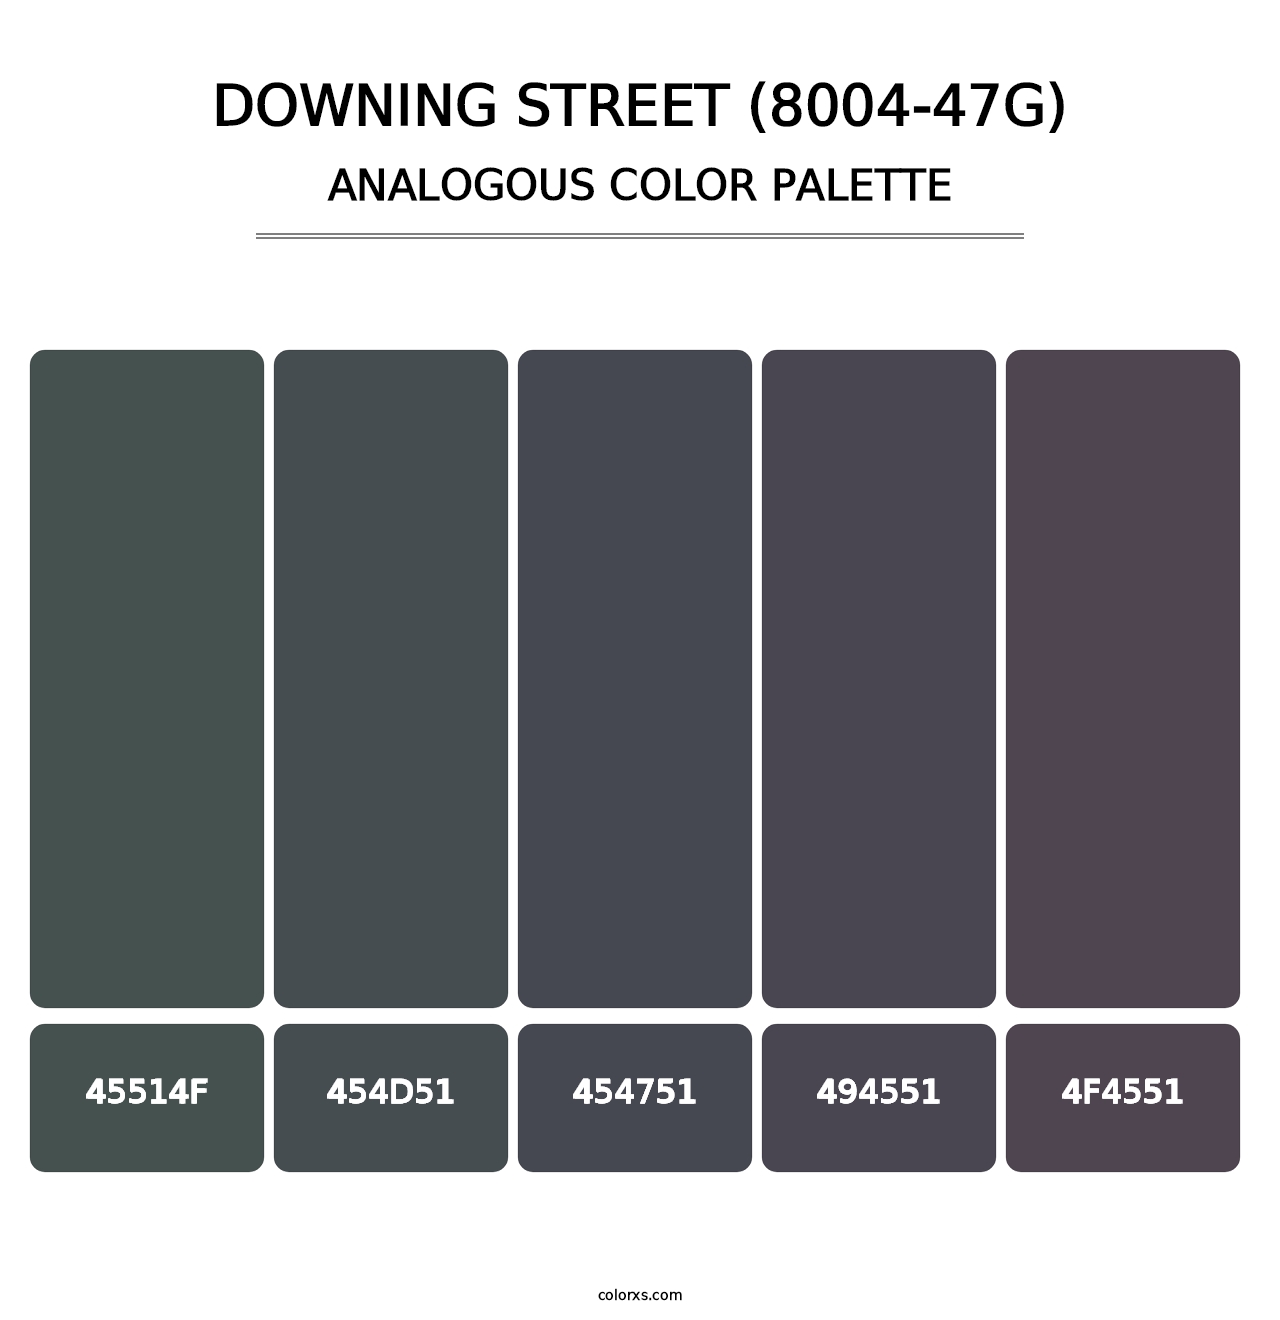 Downing Street (8004-47G) - Analogous Color Palette